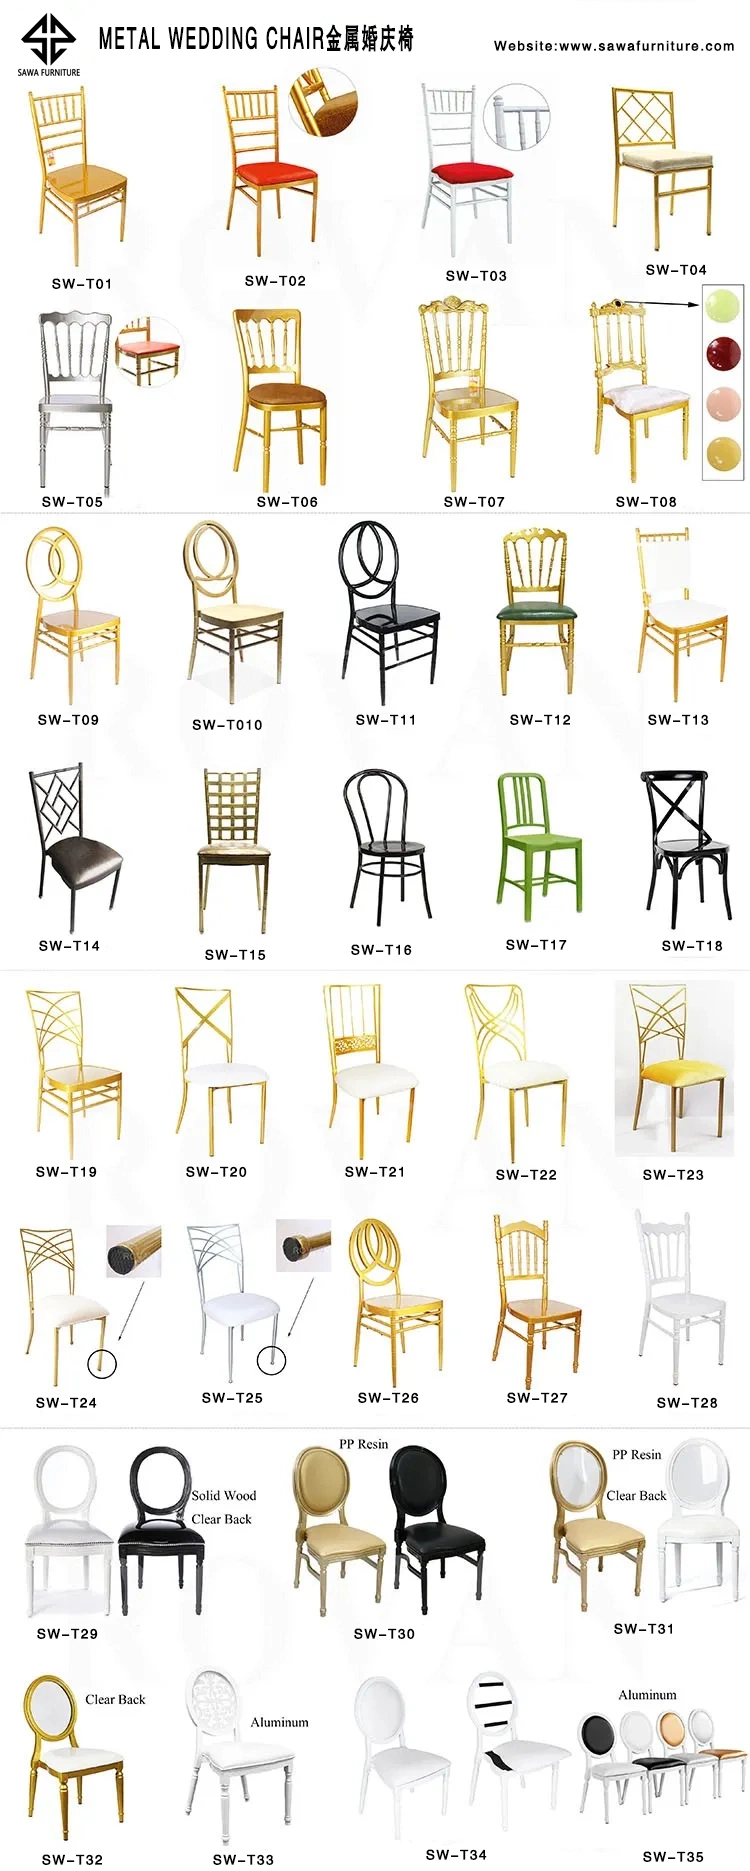 Chic Nautical Director&prime;s Chairs with Durable Canvas Back and Seat, Perfect for Beach Weddings and Oceanfront Venues